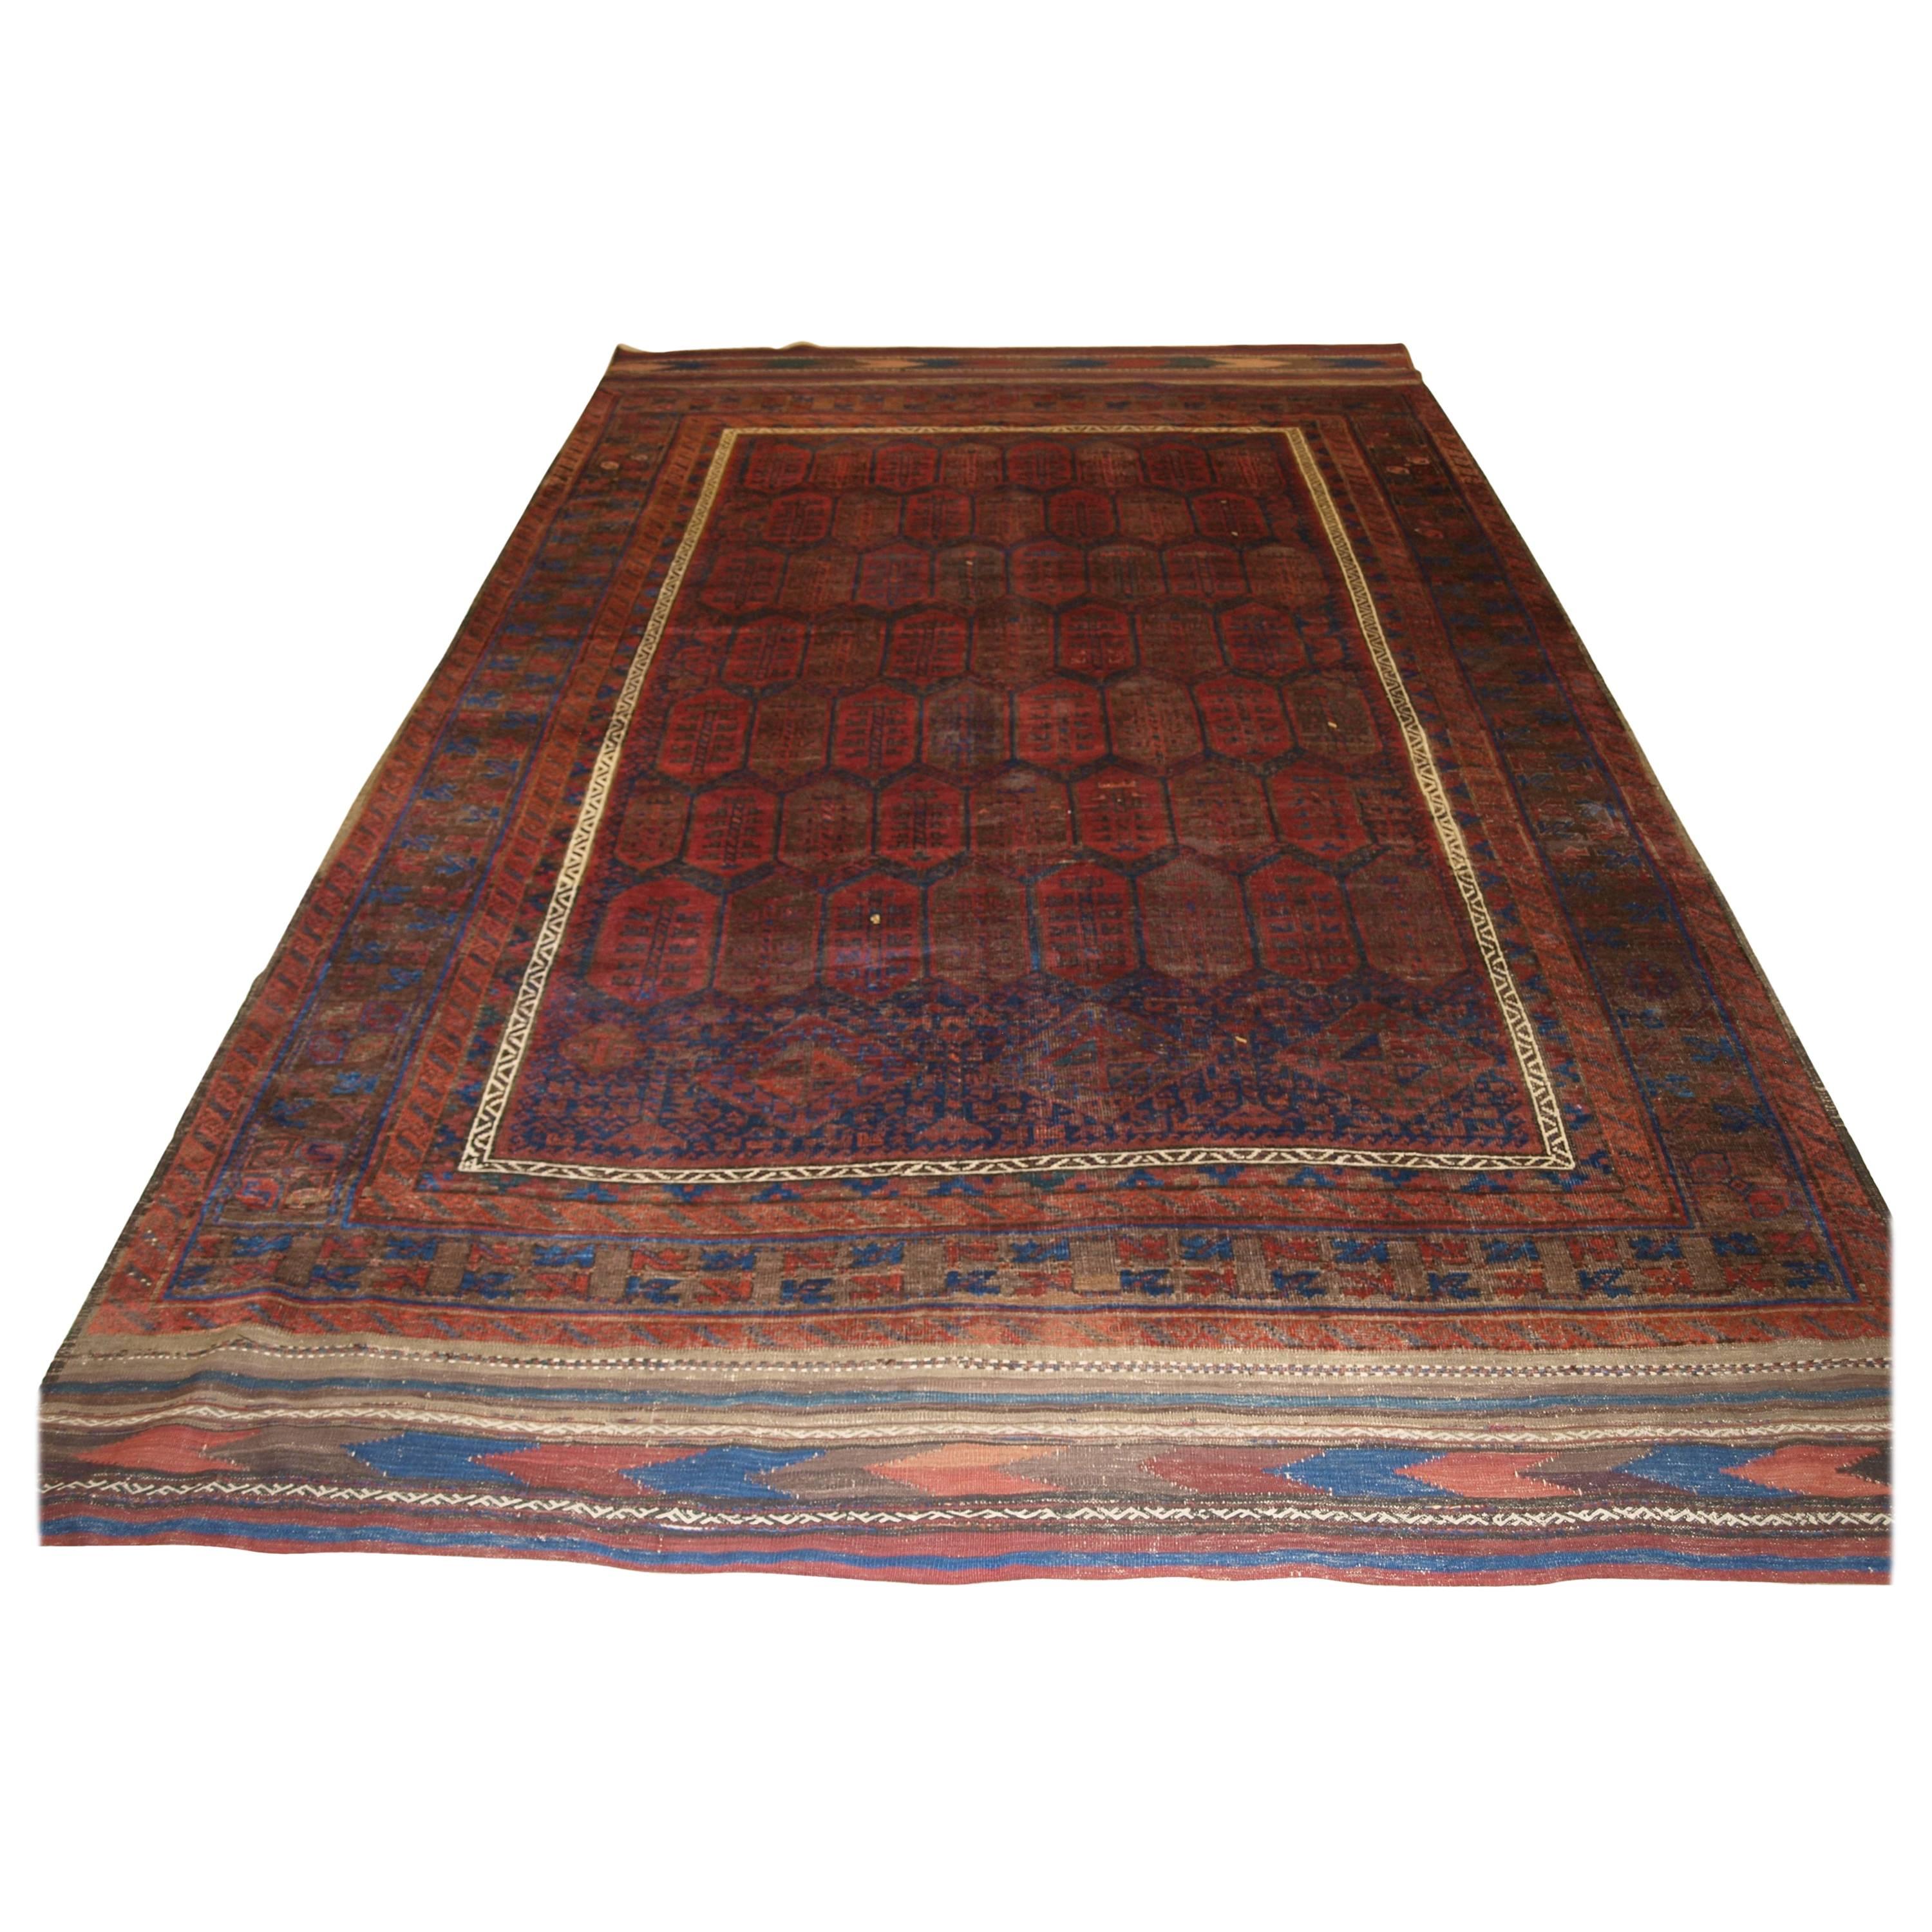 Antique Main Carpet by the Baluch of Western Afghanistan, Shrub Design For Sale